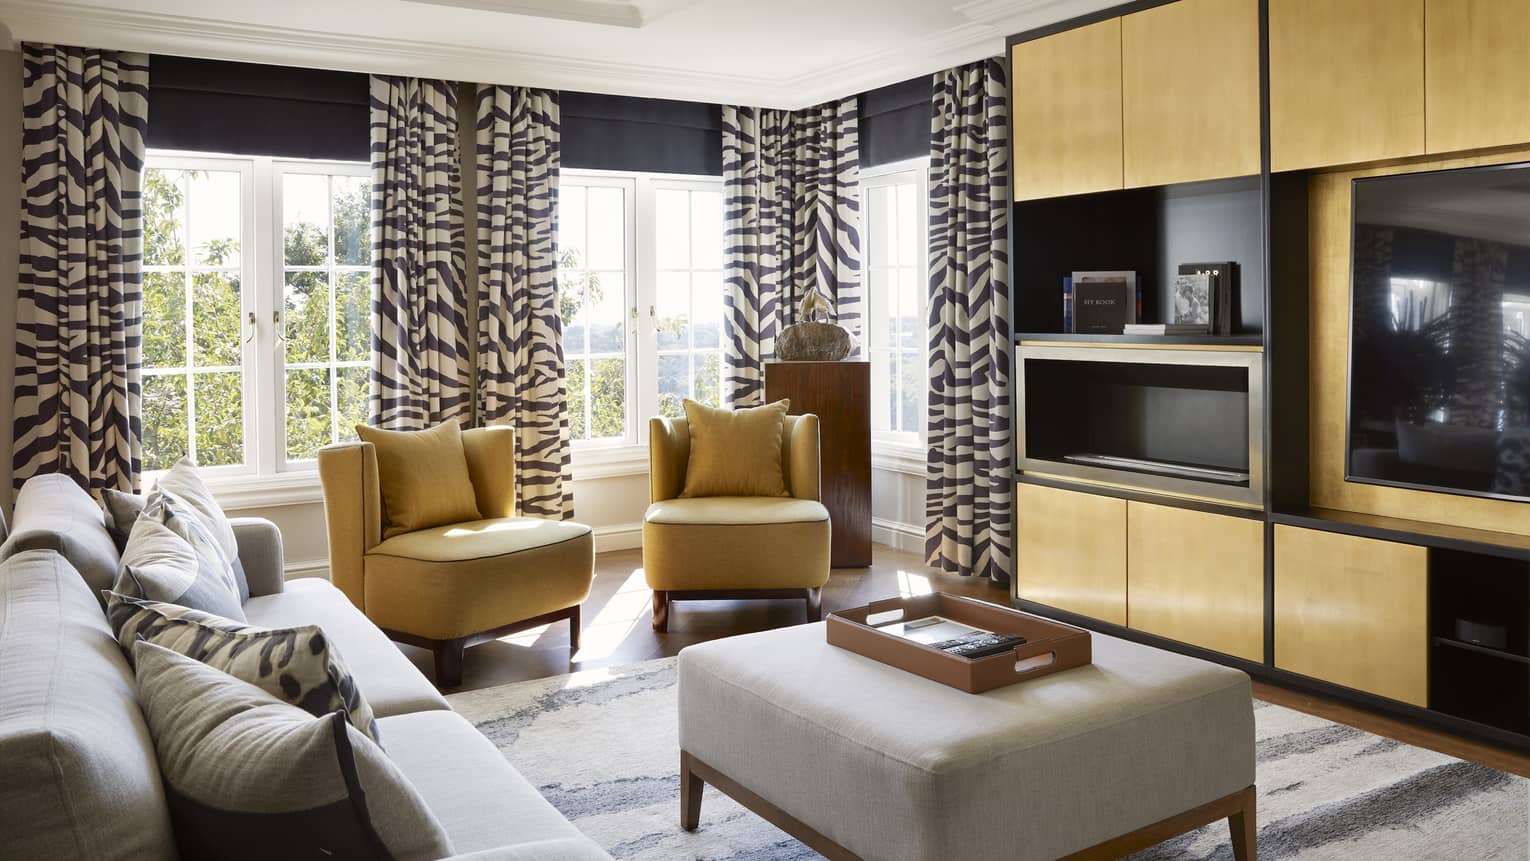 Luxury hotel suite living room with modern, light grey sofa, two yellow arm chairs, media centre and zebra-patterned curtains, at Four Seasons Hotel Johannesburg